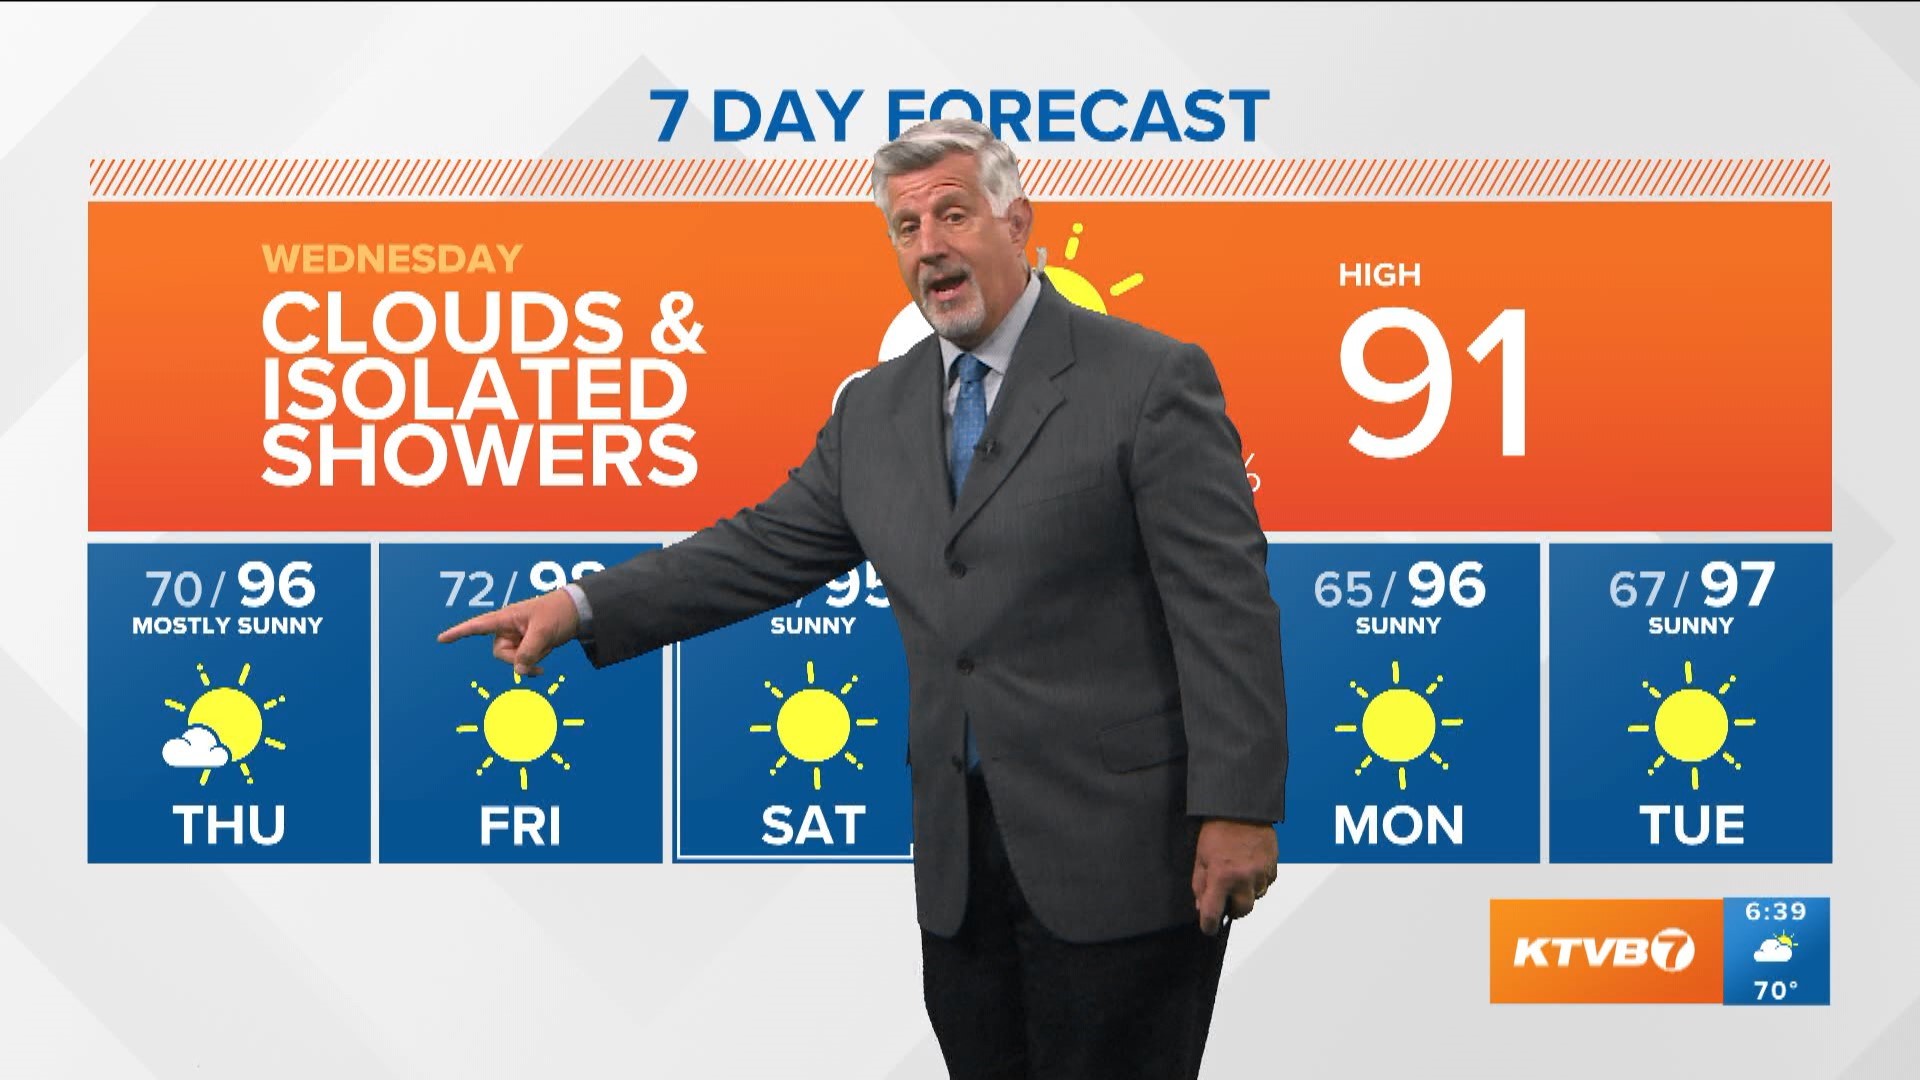 KTVB Boise First Alert Weather August 10, 2022, with meteorologist Jim Duthie.